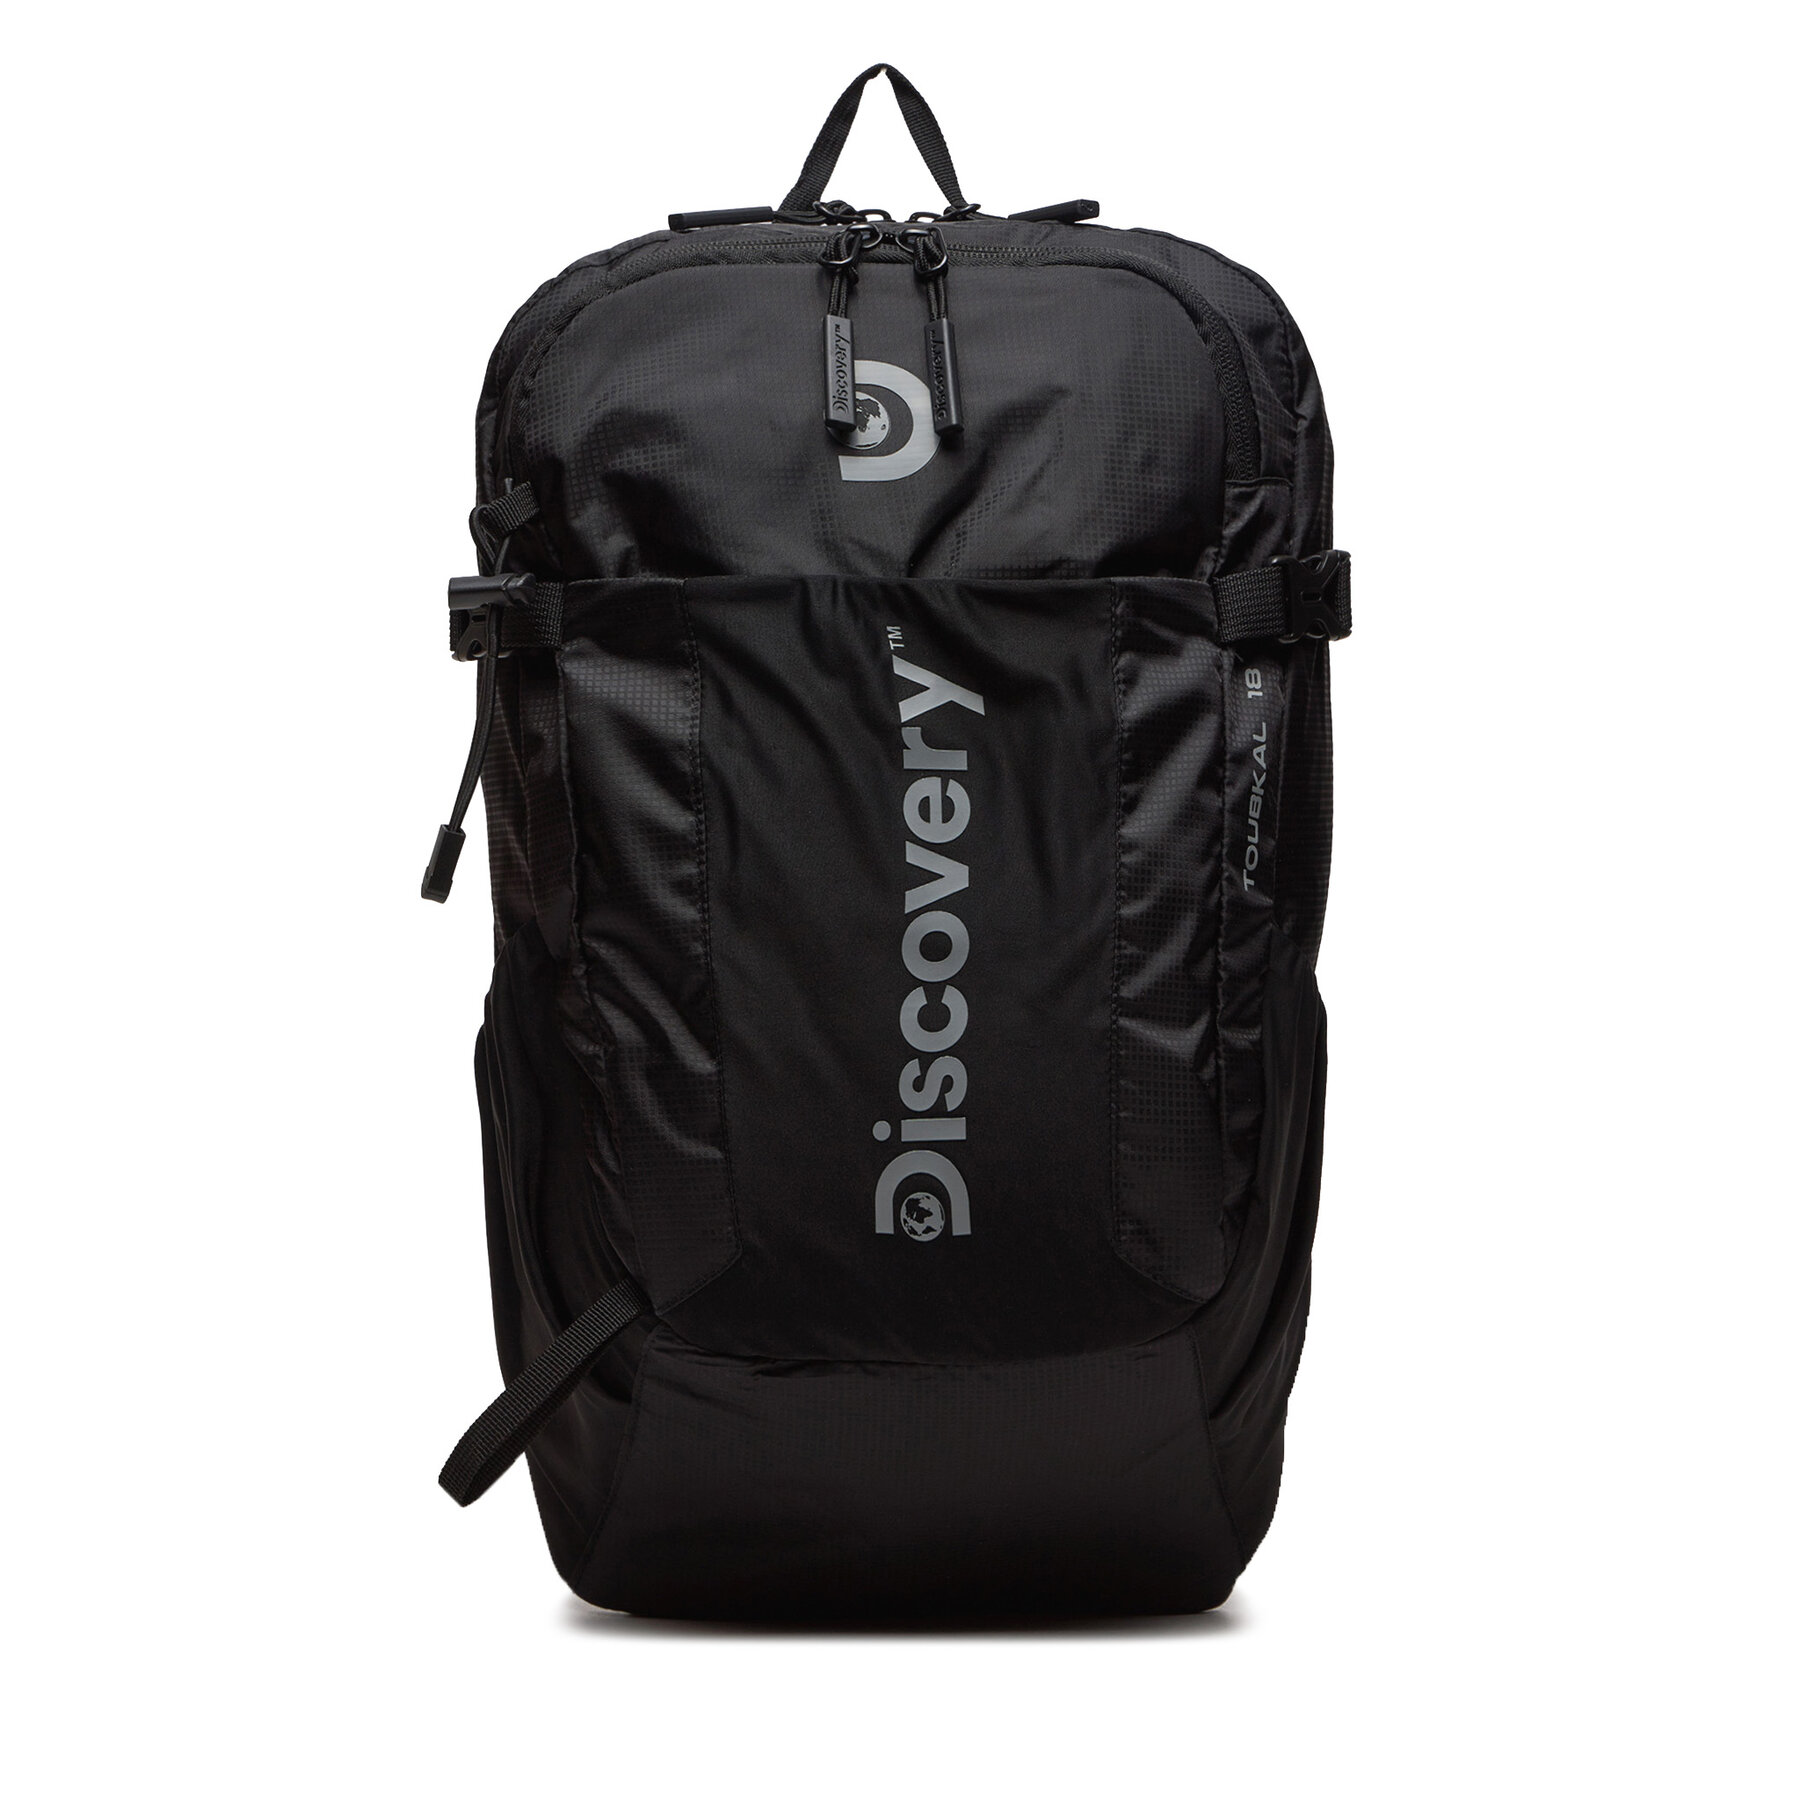 Rucksack Discovery Toubkal 18 D00611.06 Black von Discovery